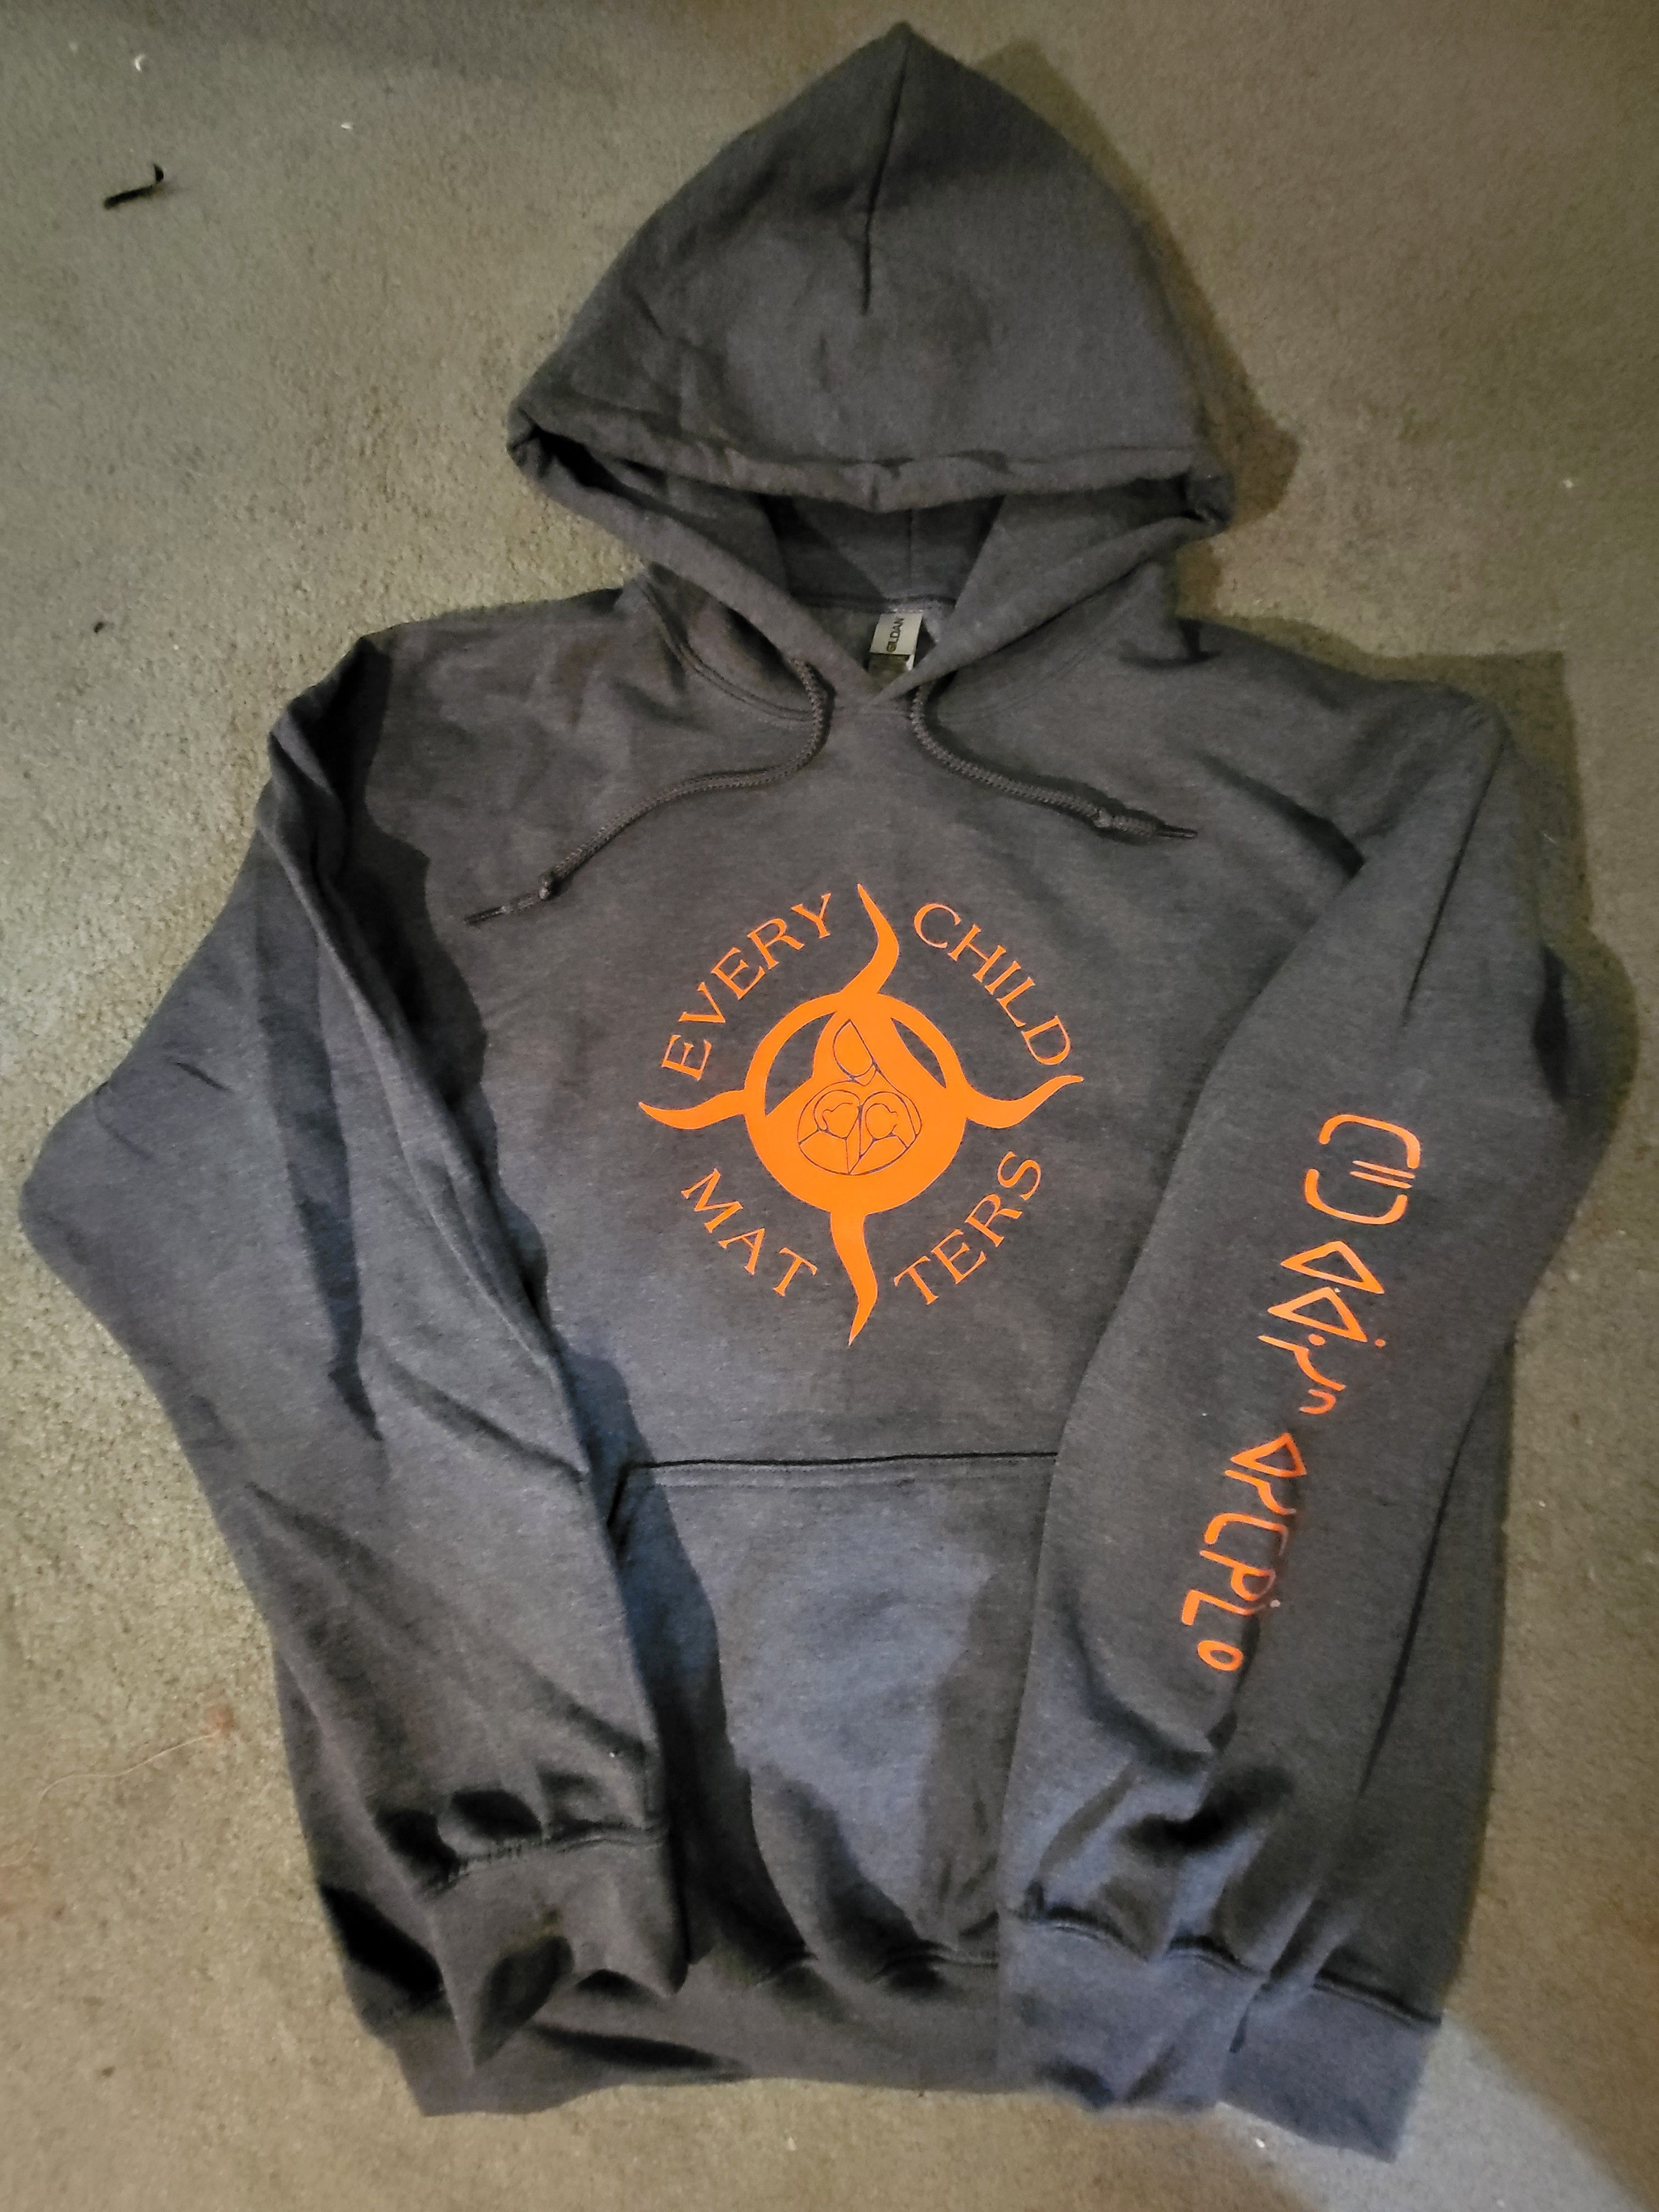 Every Child Matters | Cree | Hoodie